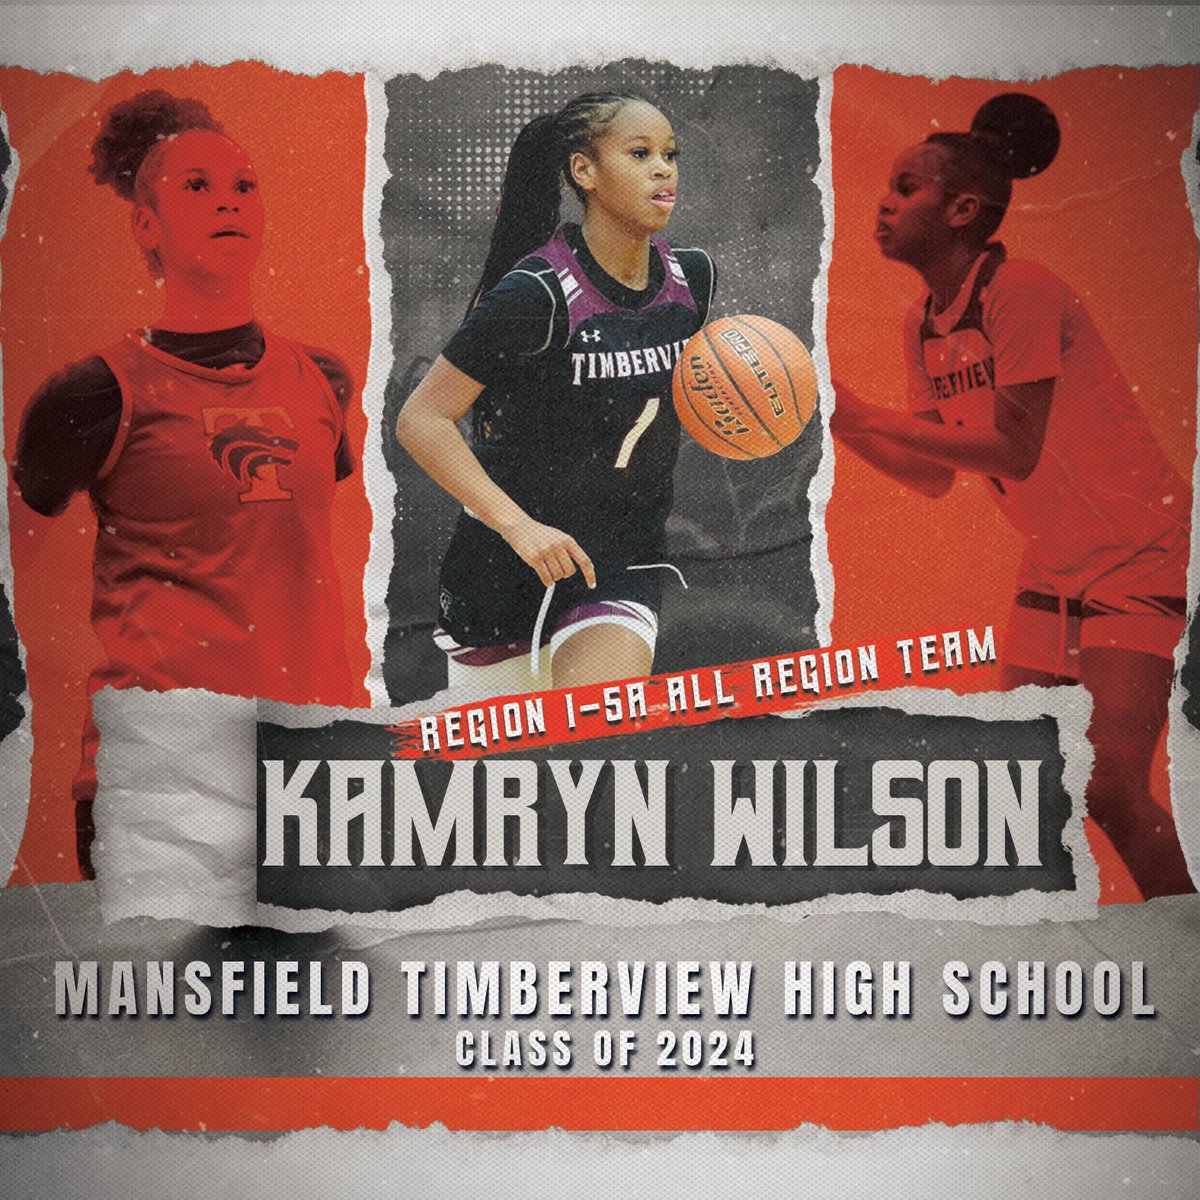 Congratulations to @kamrynwilson22 for being selected to the Texas 5A - Region I All Region Team!! So proud of you! @uiltexas @ladywolfbball @LadyJetsElite